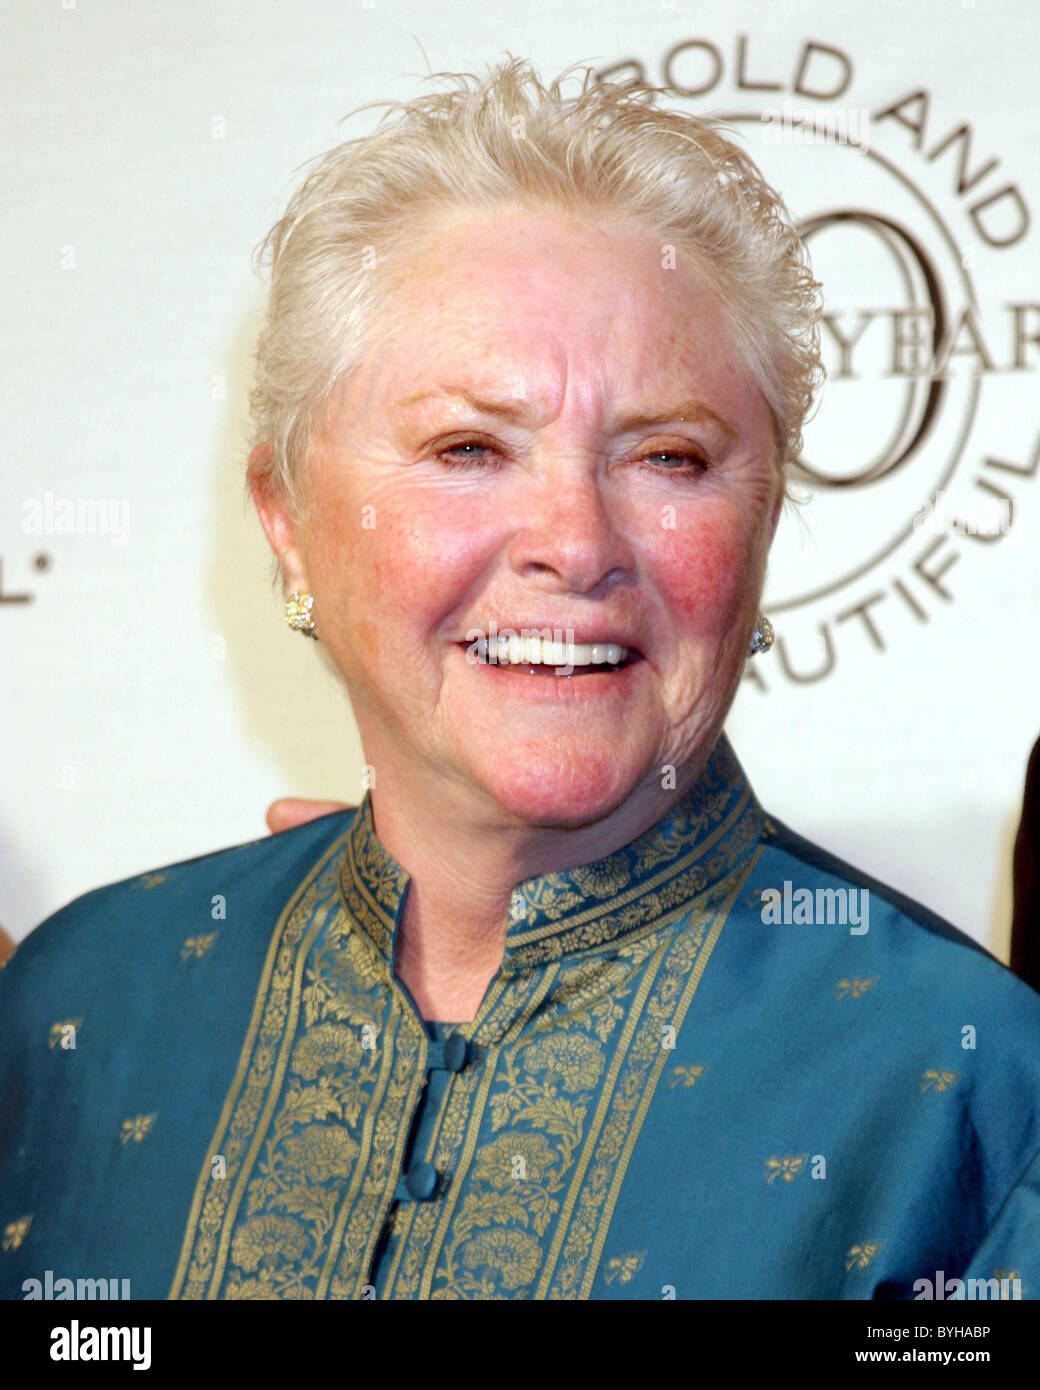 Susan Flannery The Bold and The Beautiful 20th Anniversary Party at Two Rodeo Drive Beverly Hills, CA - 24.03.07 Stock Photo